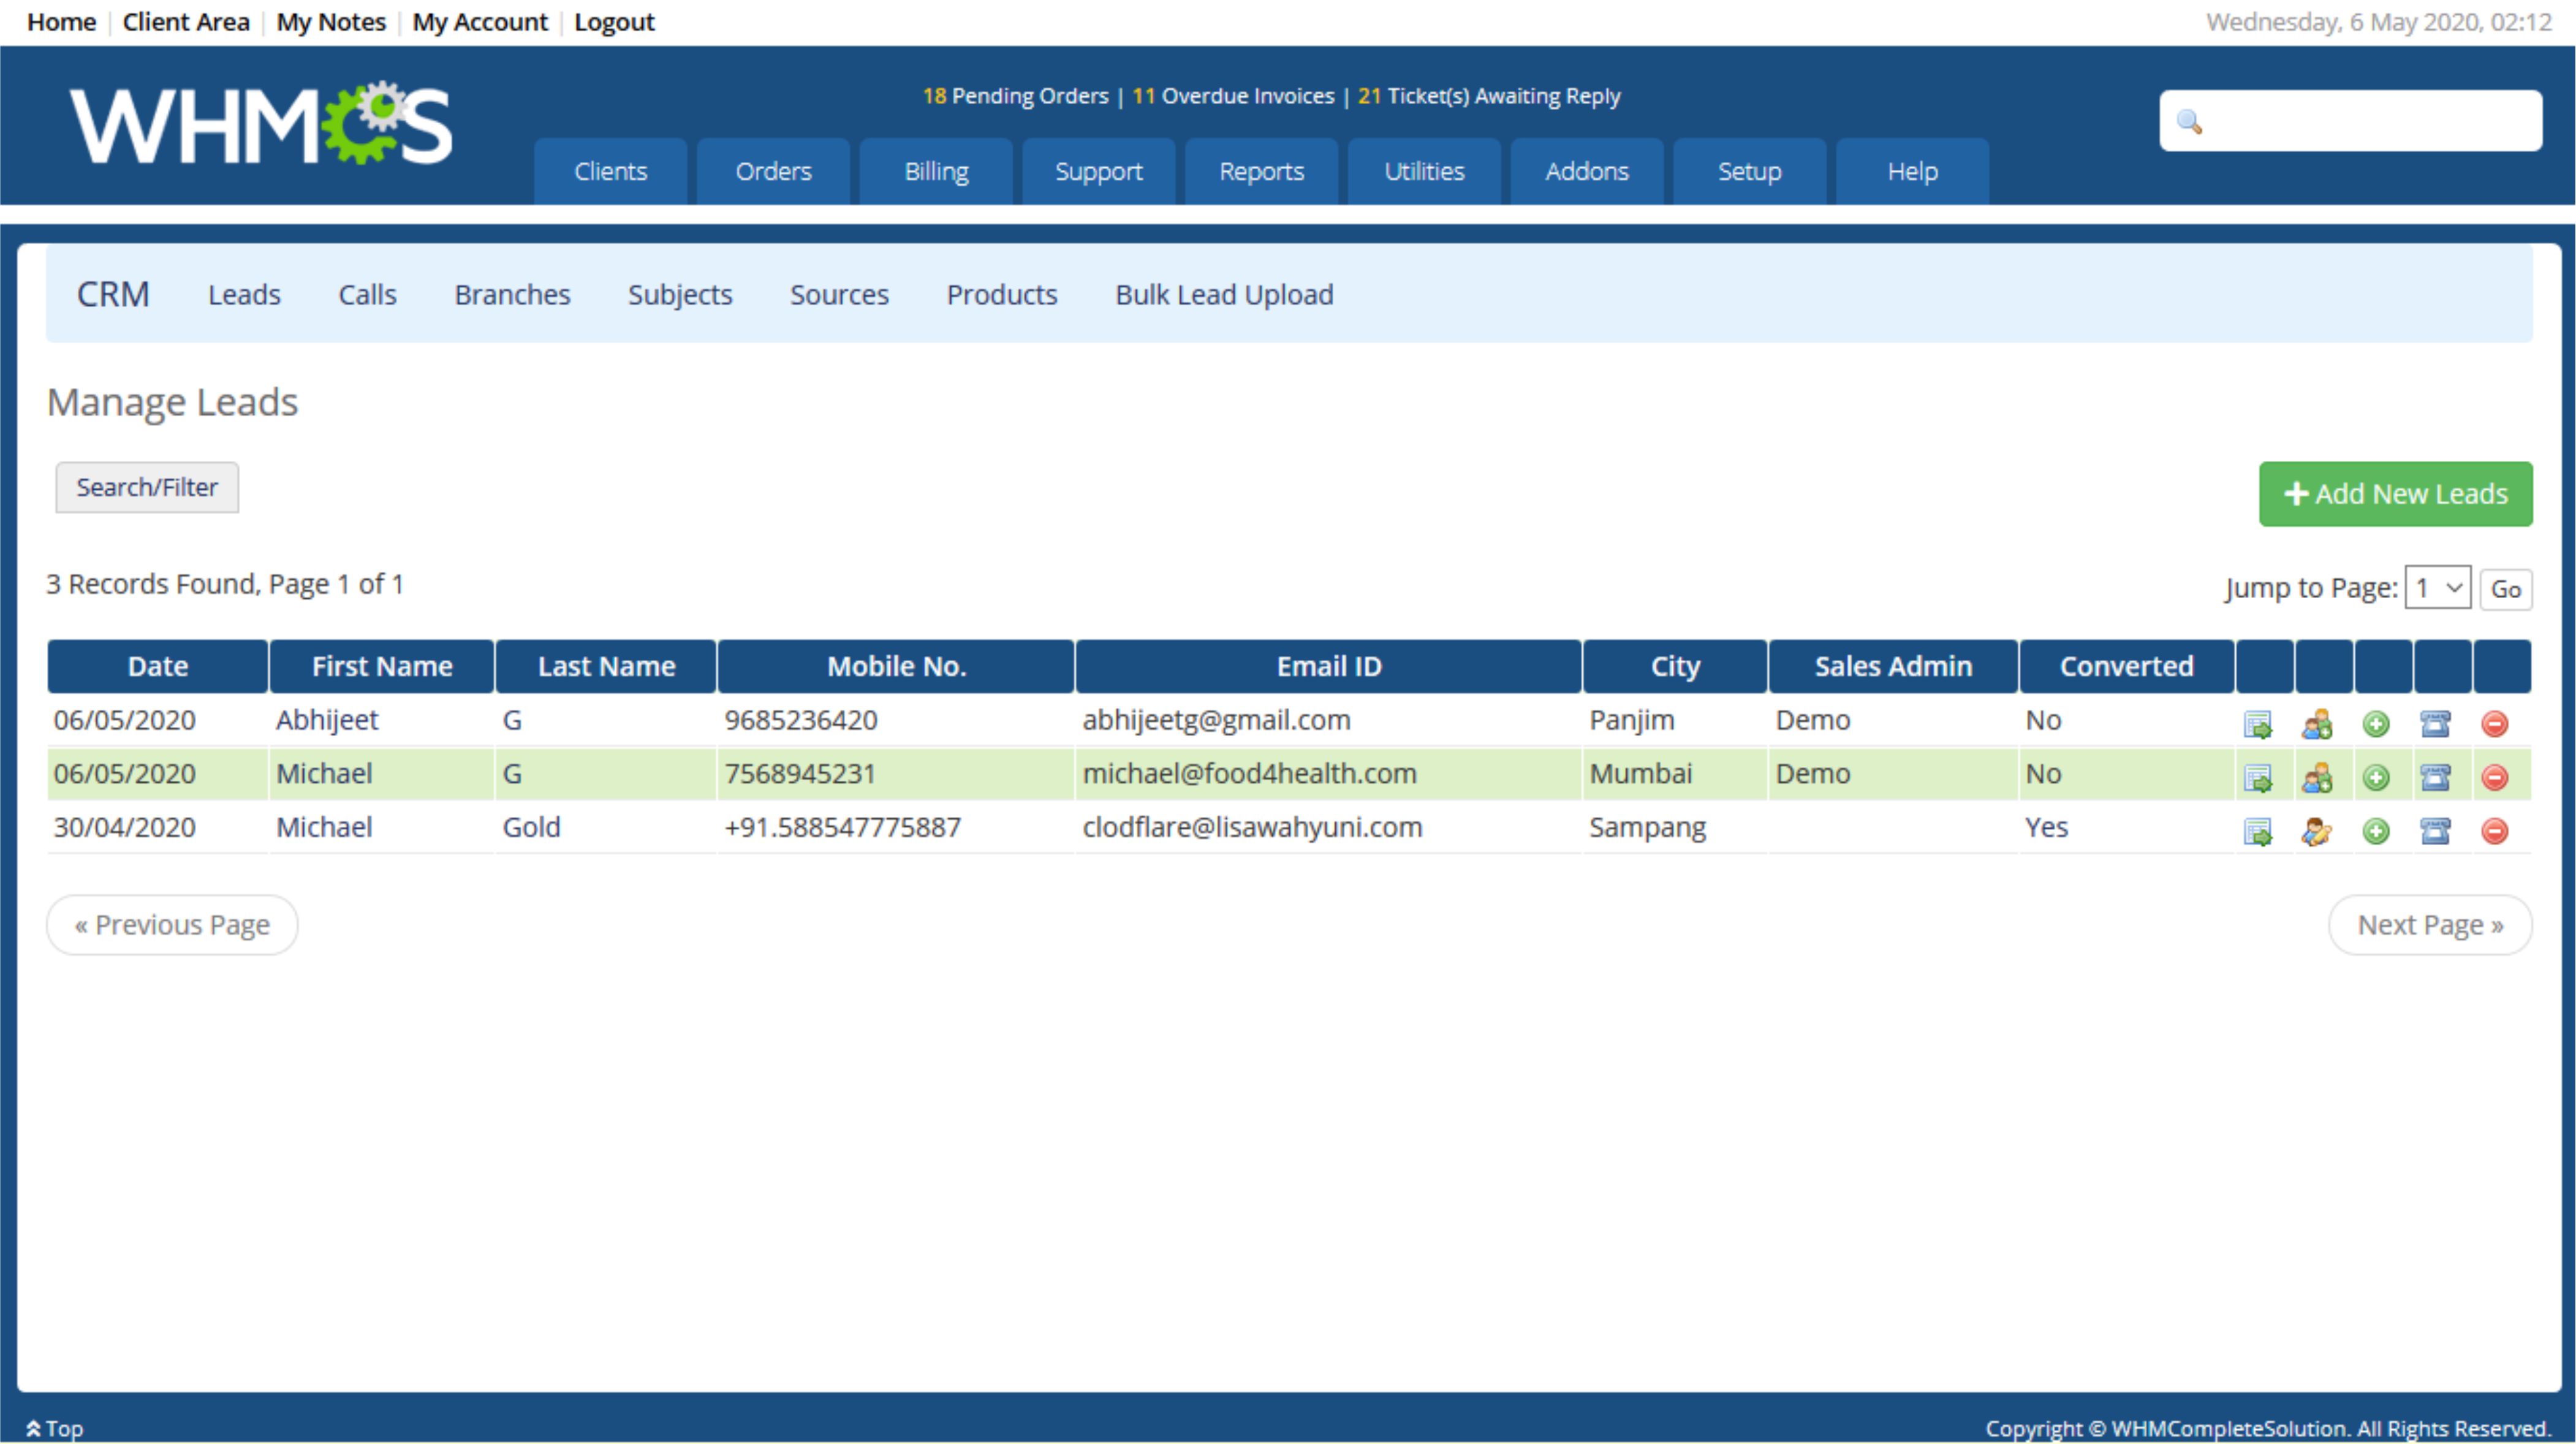 WHMCS CRM - Simplest CRM for WHMCS